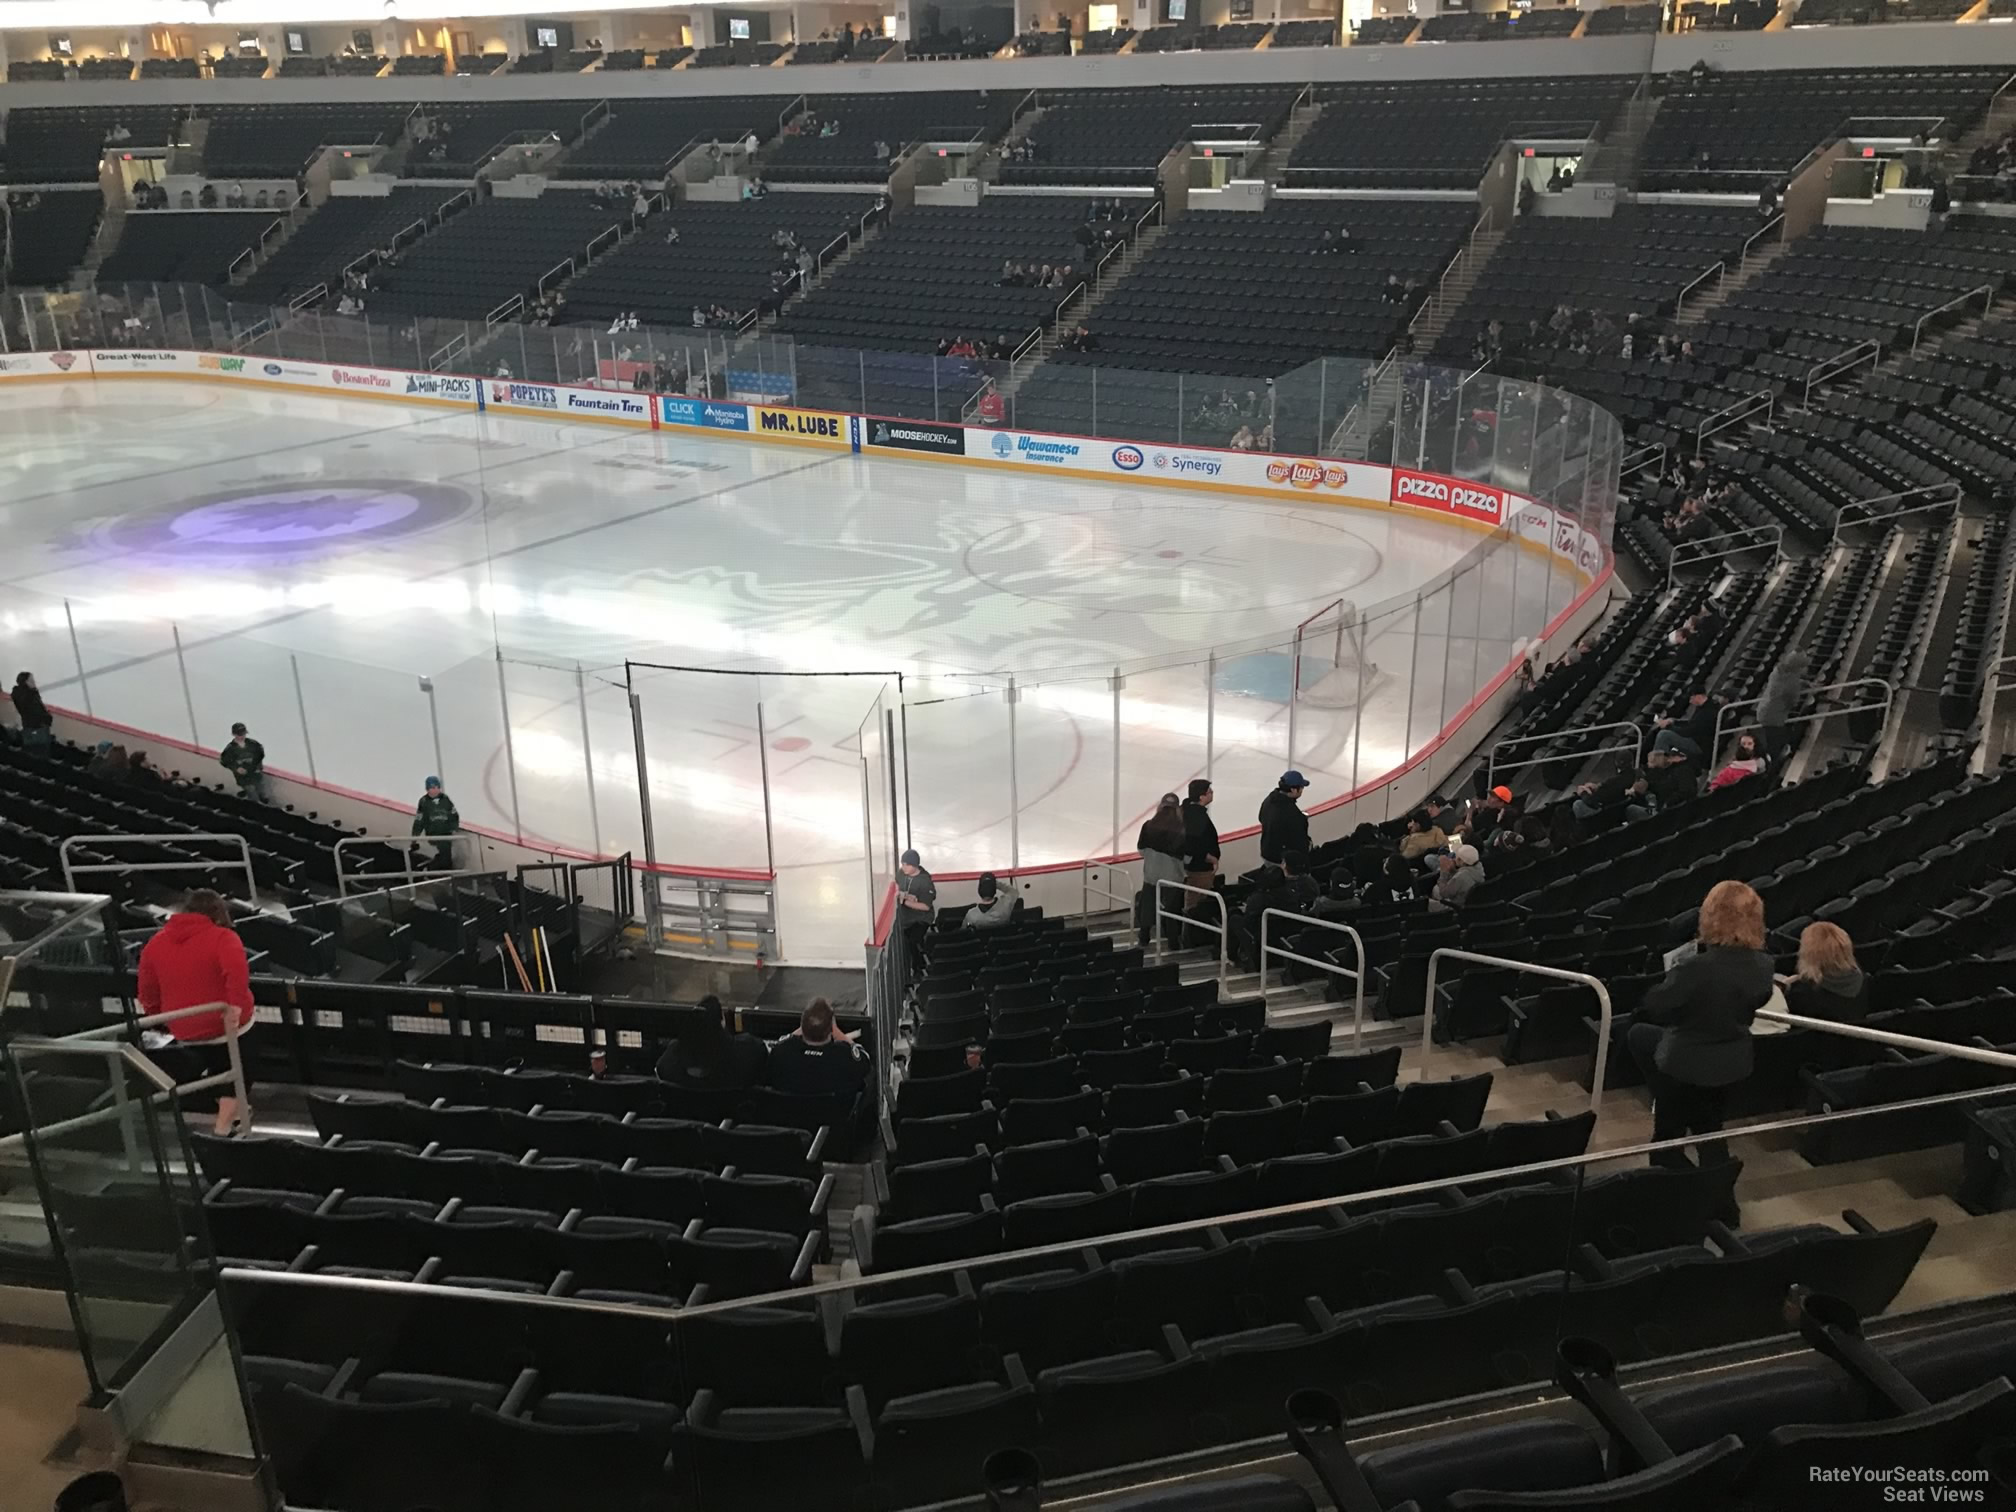 section 215, row 4 seat view  for hockey - canada life centre